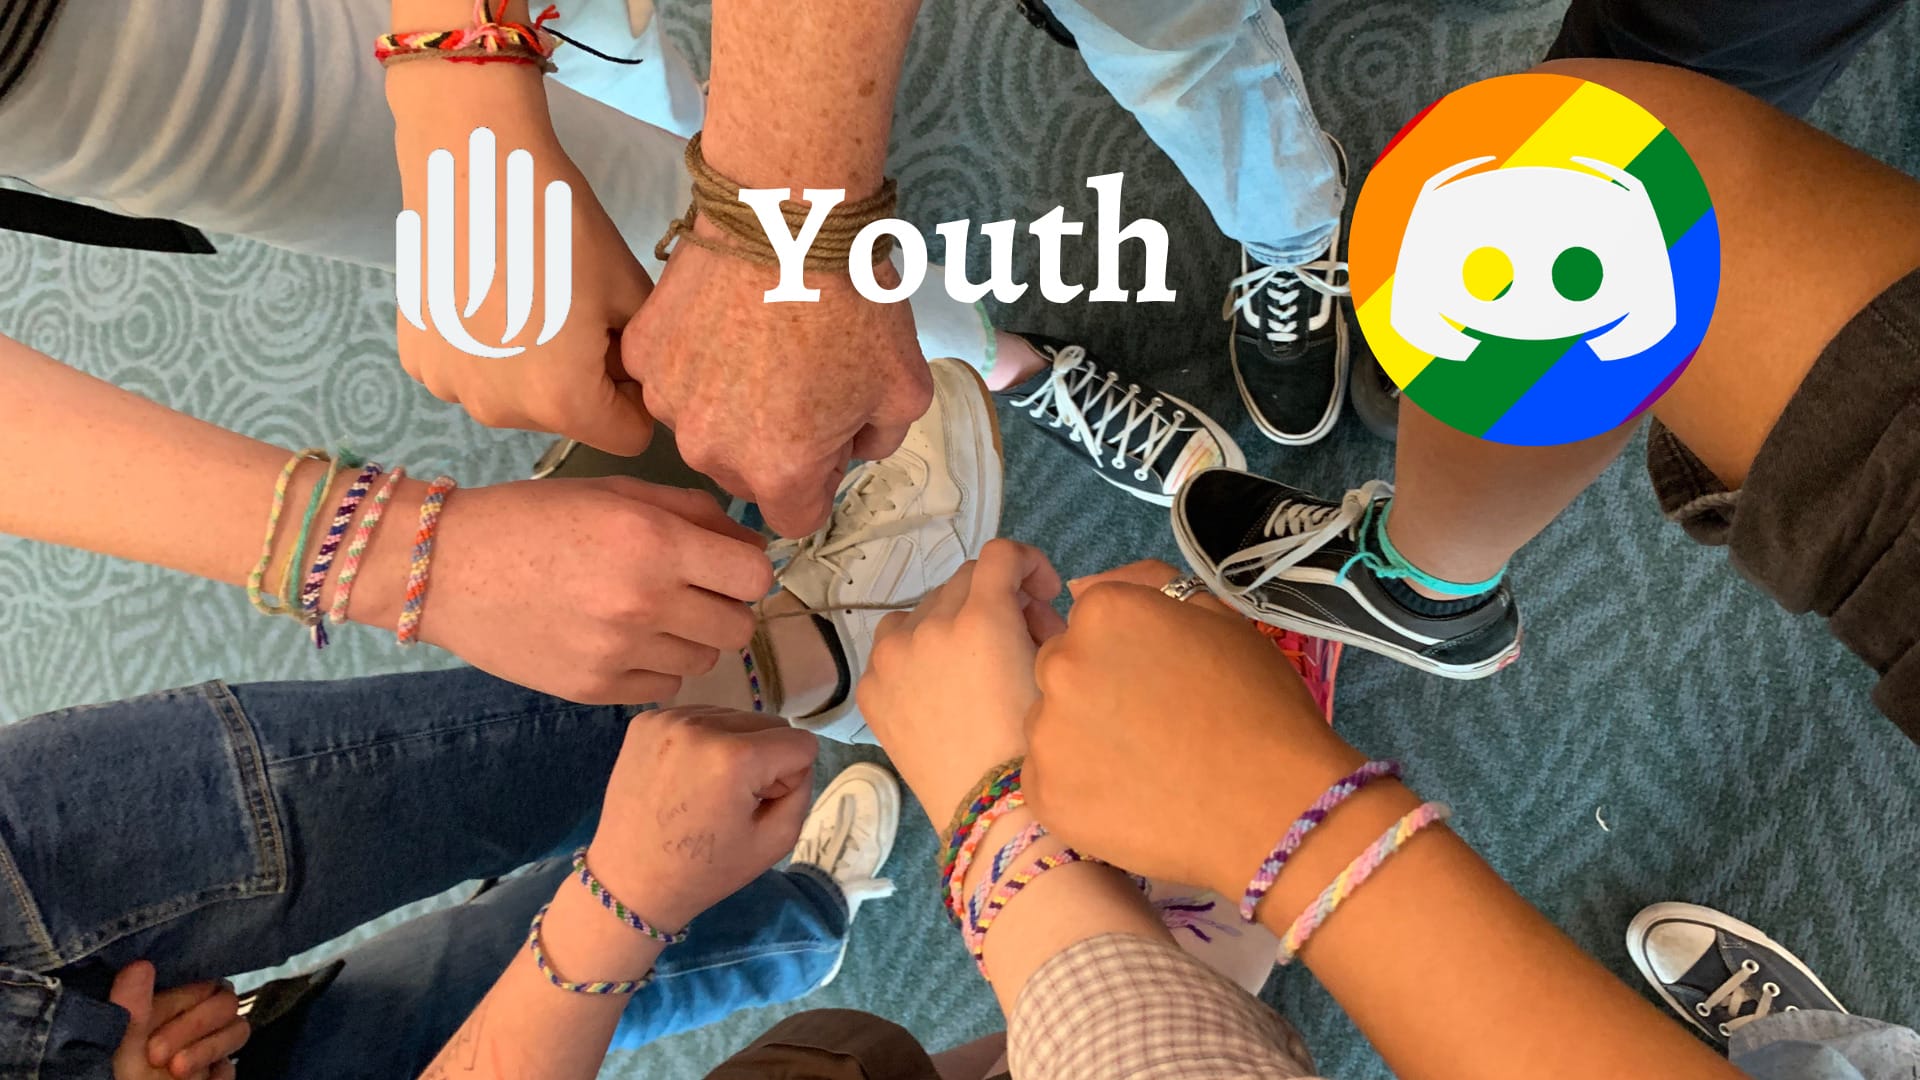 circle of hands, young and old, showing off friendship bracelets with the caption "Youth".